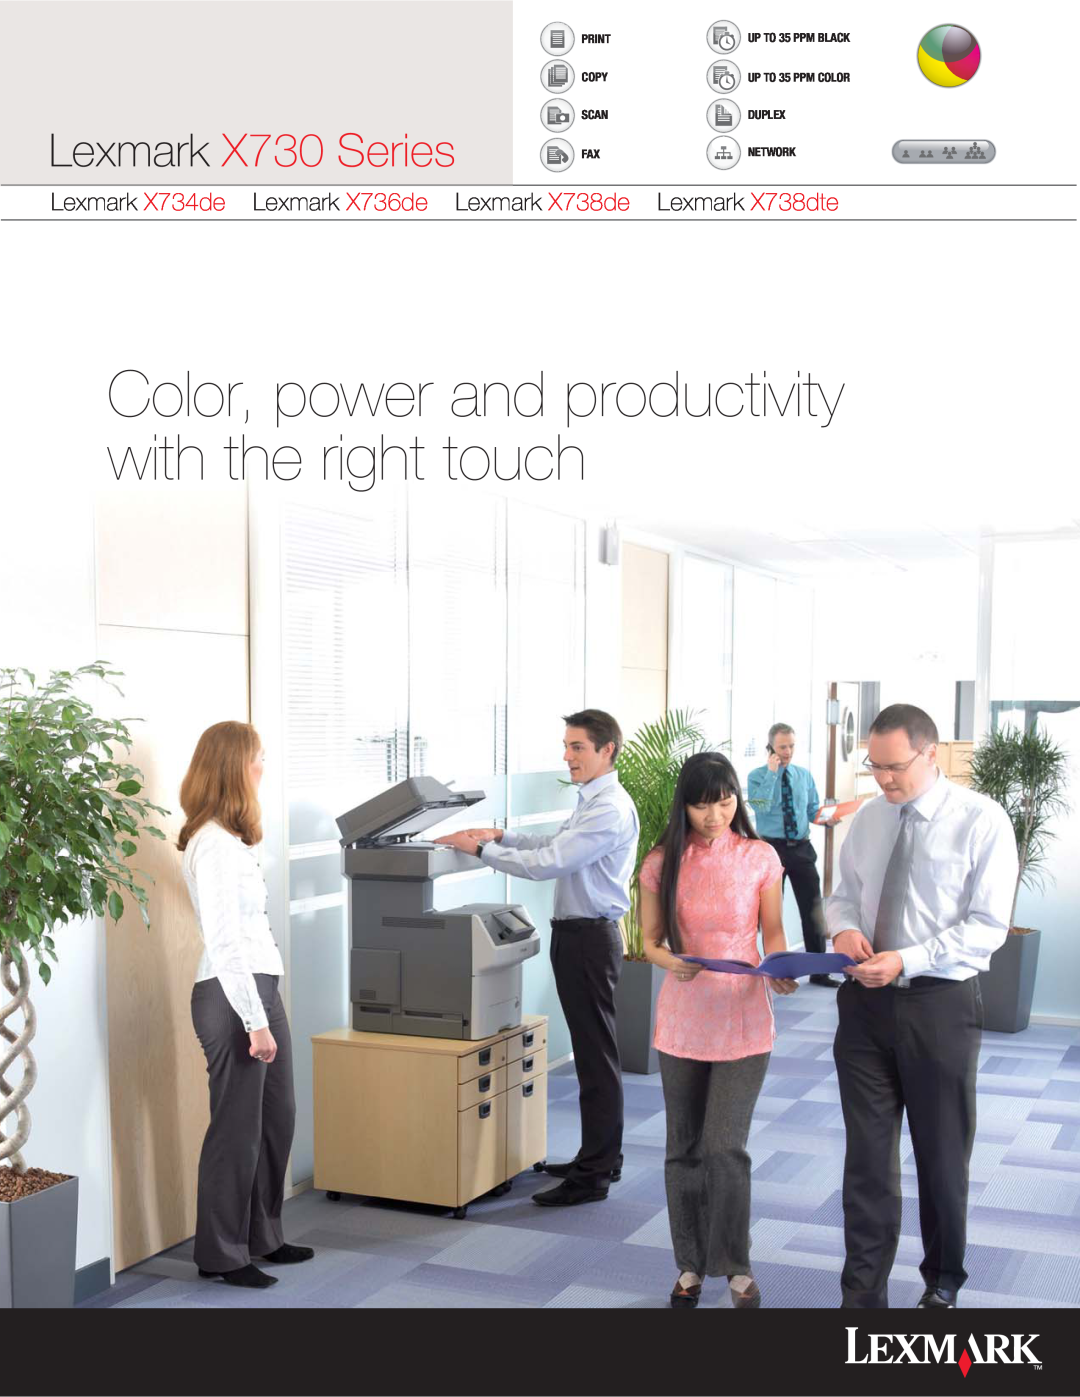 Lexmark manual Lexmark X730 Series, Color, power and productivity with the right touch, Print Copy Scan Fax 